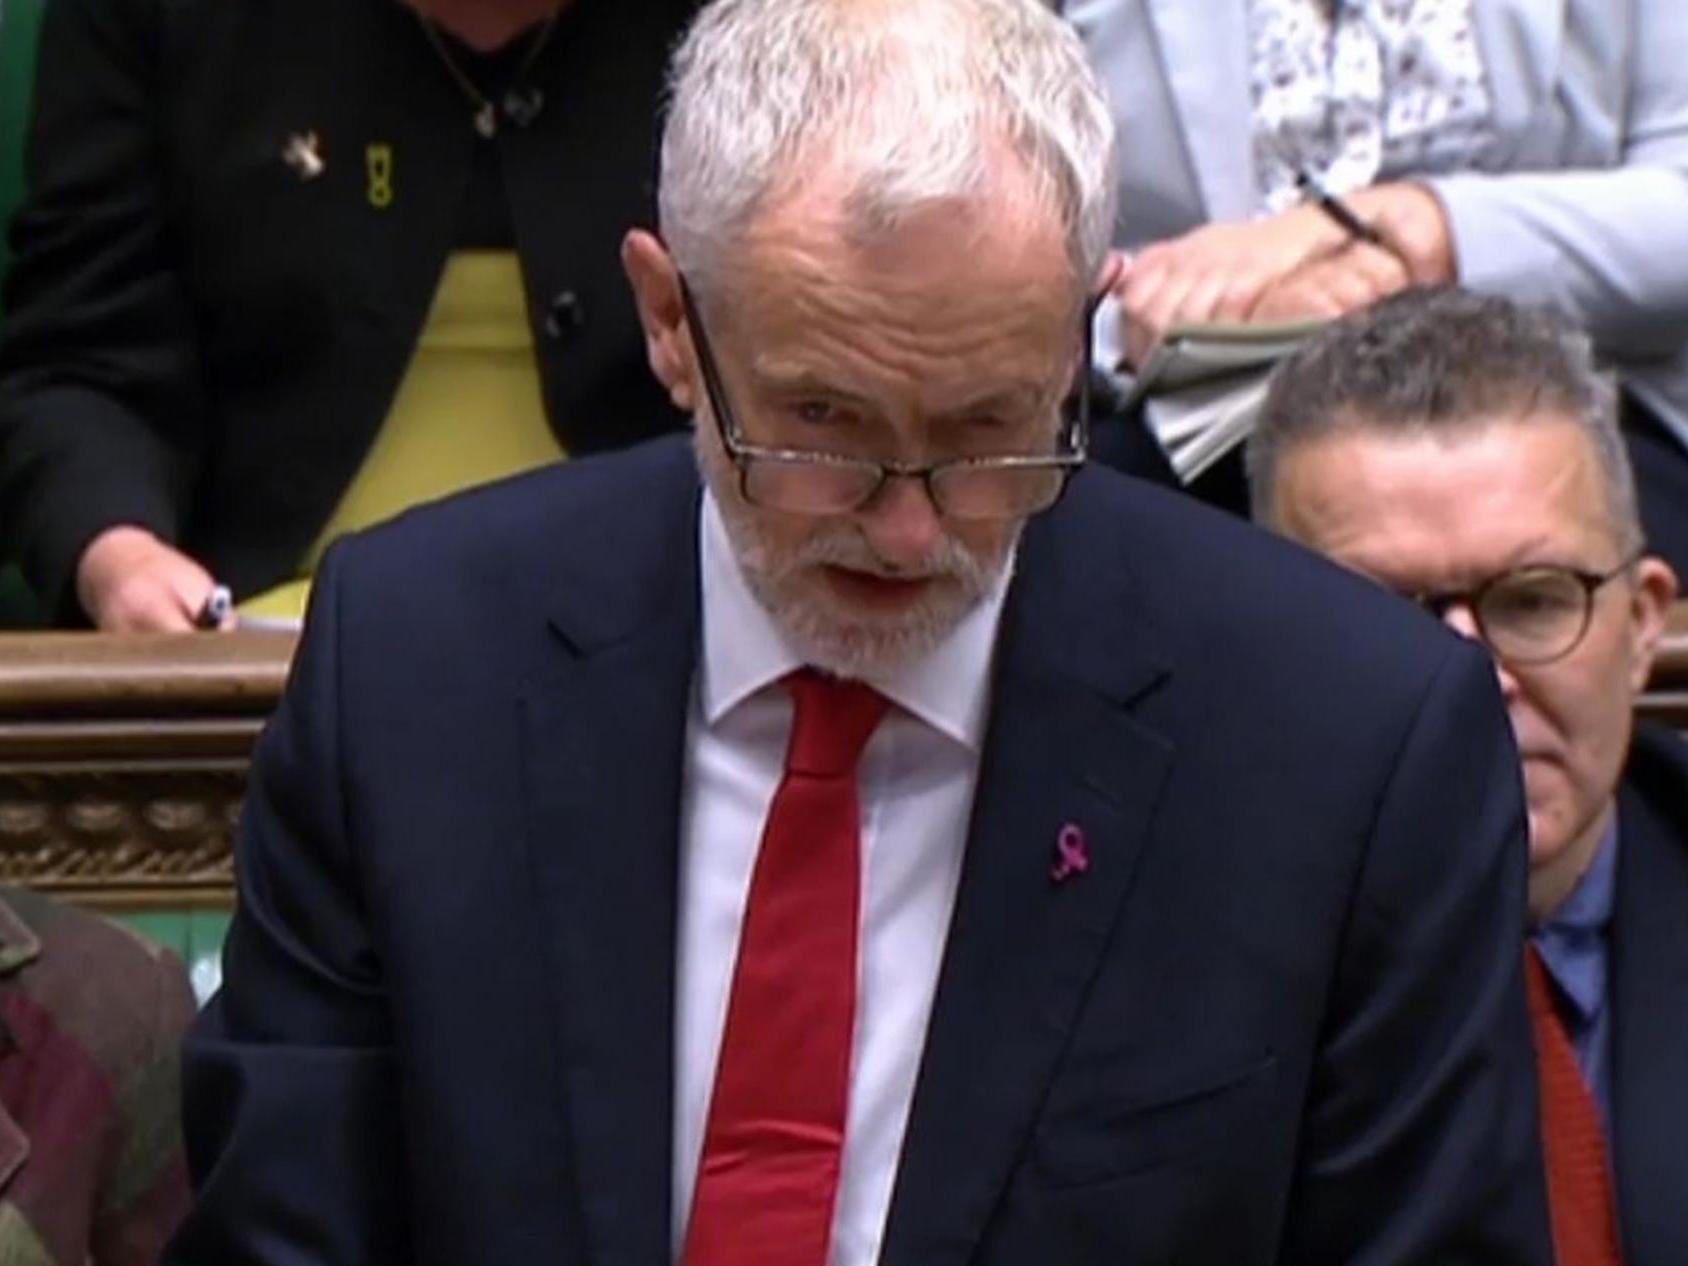 PMQs: Who won? I&apos;m not sure I even know who was there